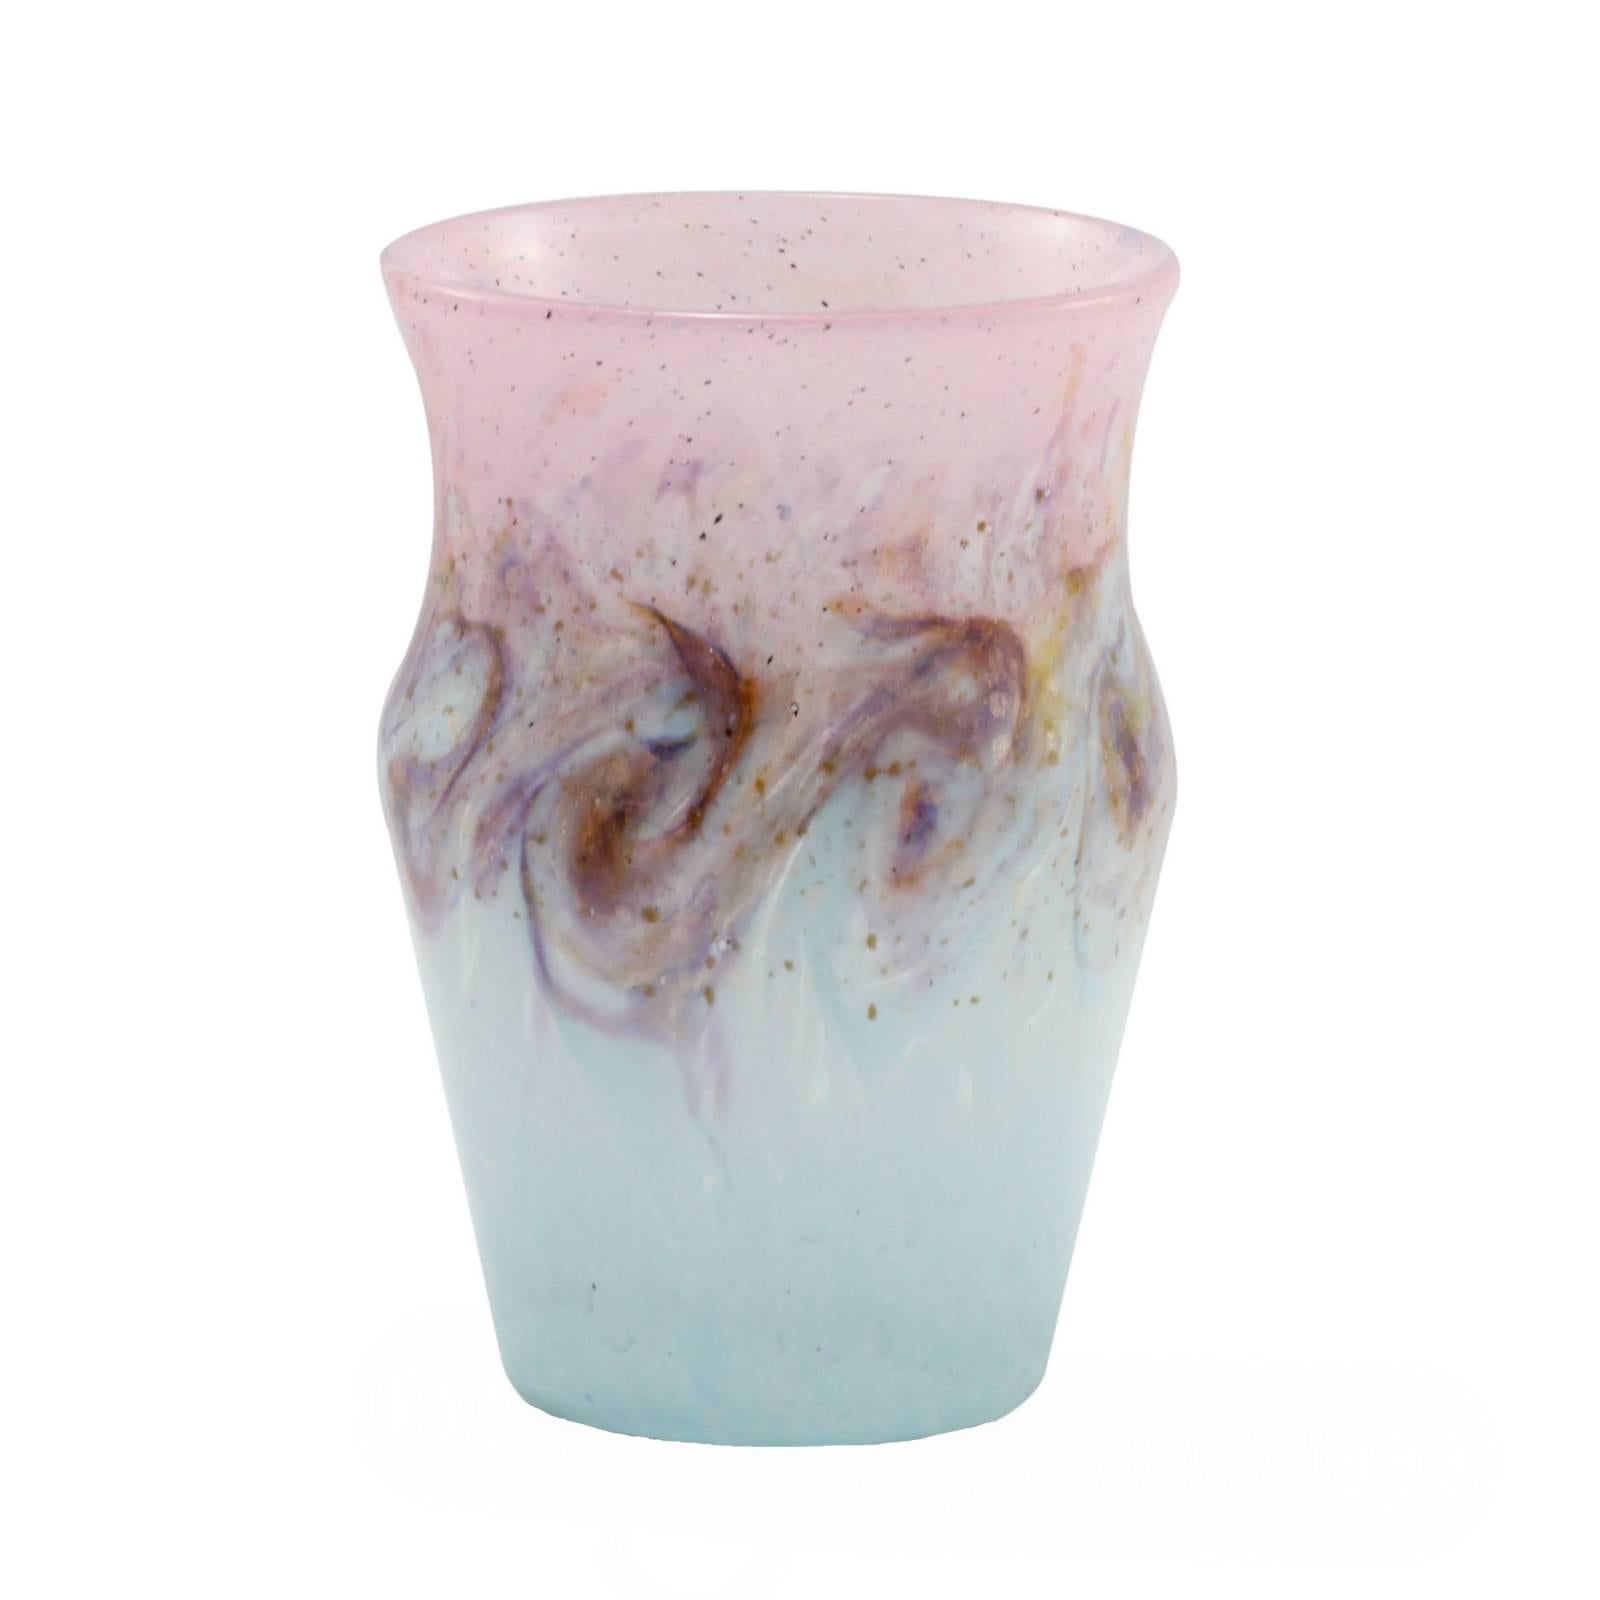 This vase by Monart was Scotland's answer to the art glass coming from France in the early 20th century. Crafted in the 1930s it was retailed by Liberty of London and features a rich palette of swirled pink and blue with metallic and iridescent